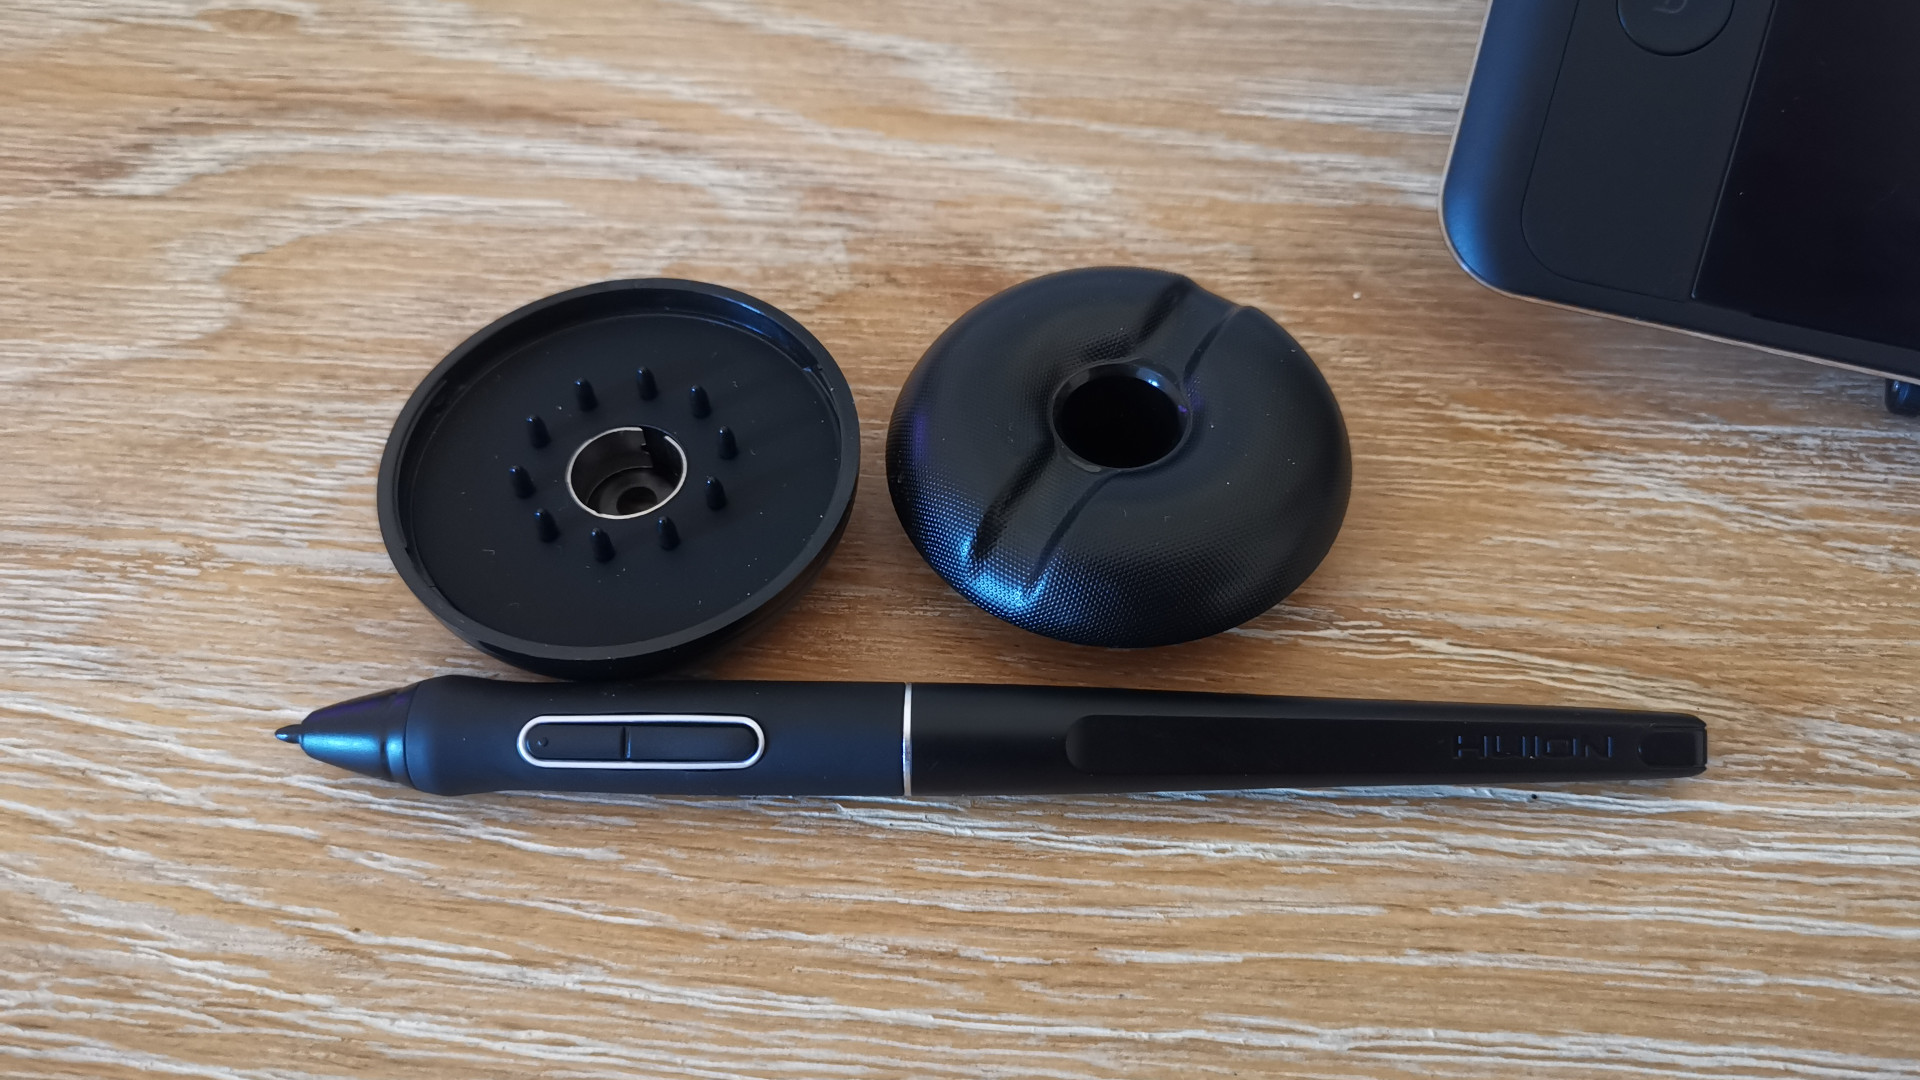 The pen, pen stand and spare nibs for the Huion Kamvas Pro 16